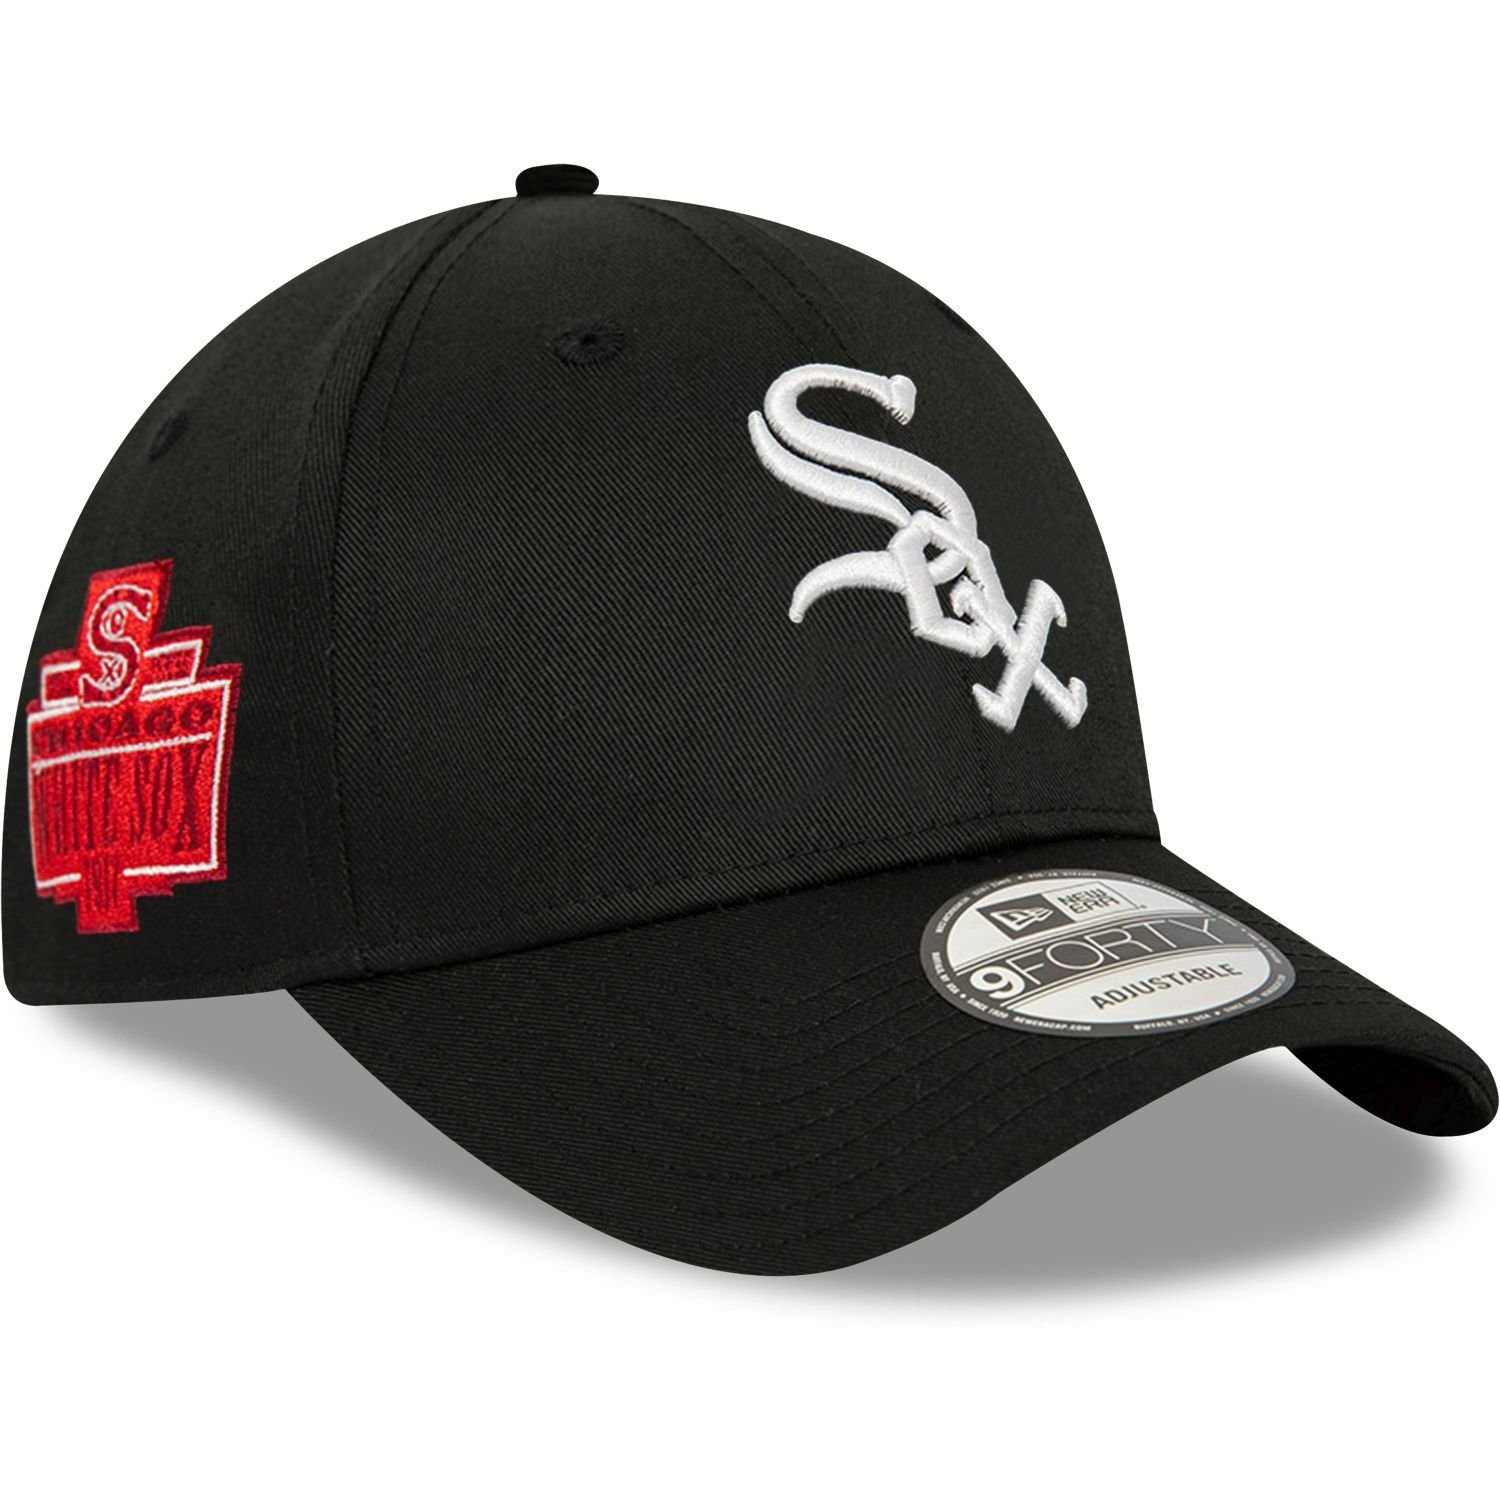 New Era Baseball Cap 9Forty SIDEPATCH Chicago White Sox